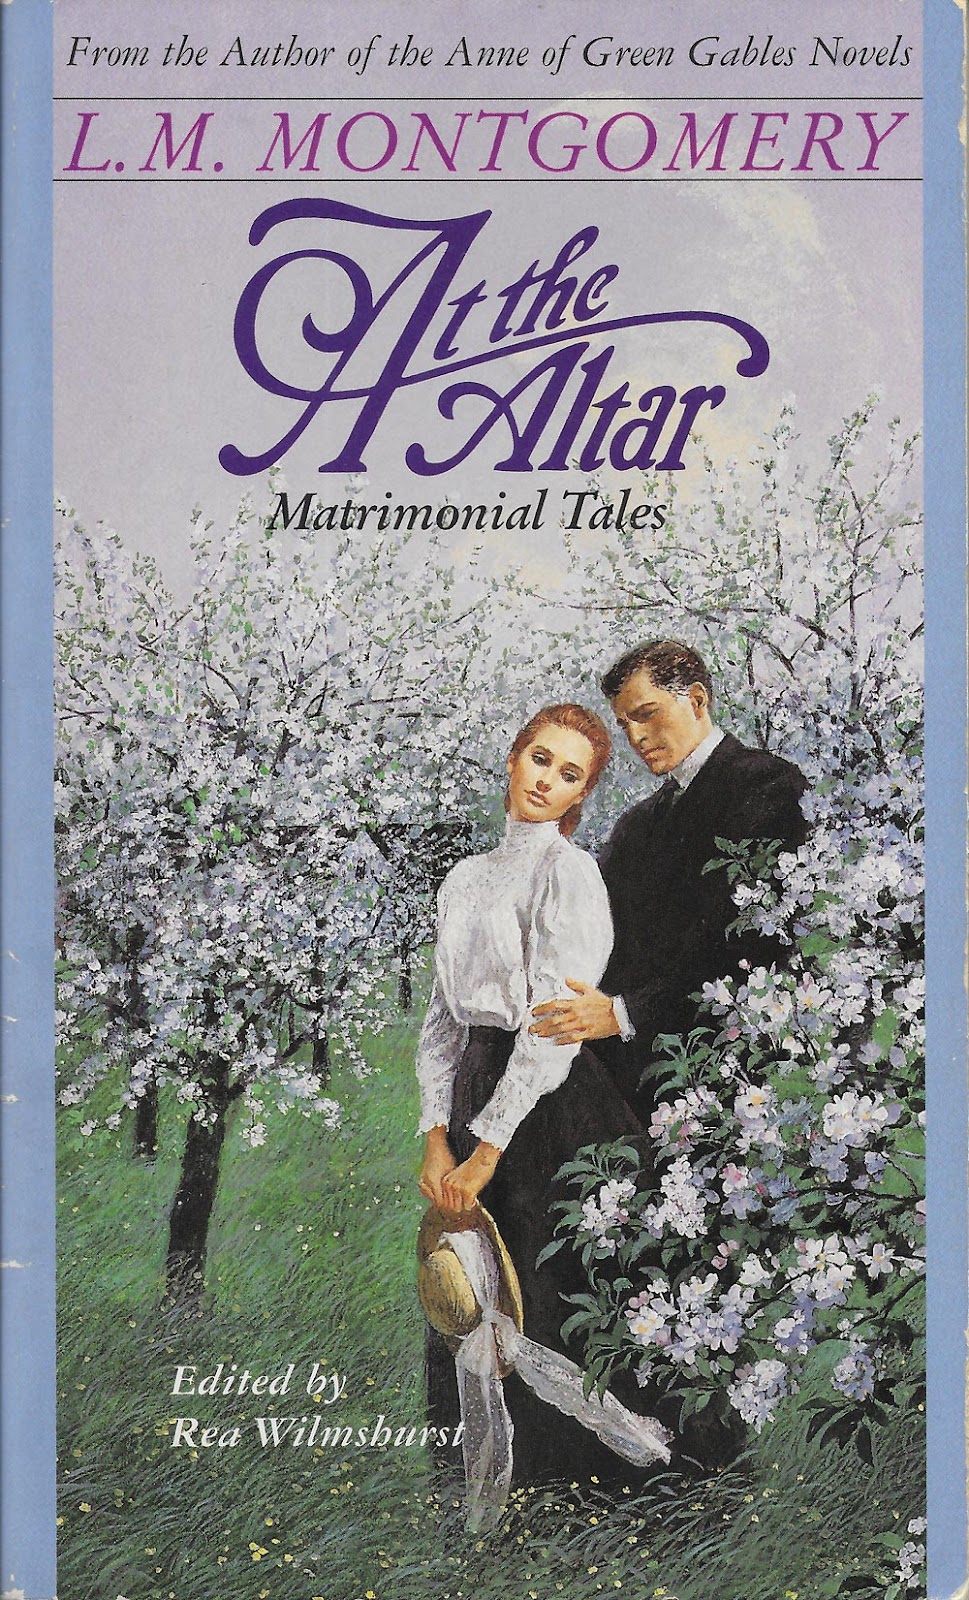 At the Altar: Matrimonial Tales by L.M. Montgomery and edited by Rea Wilmshurst